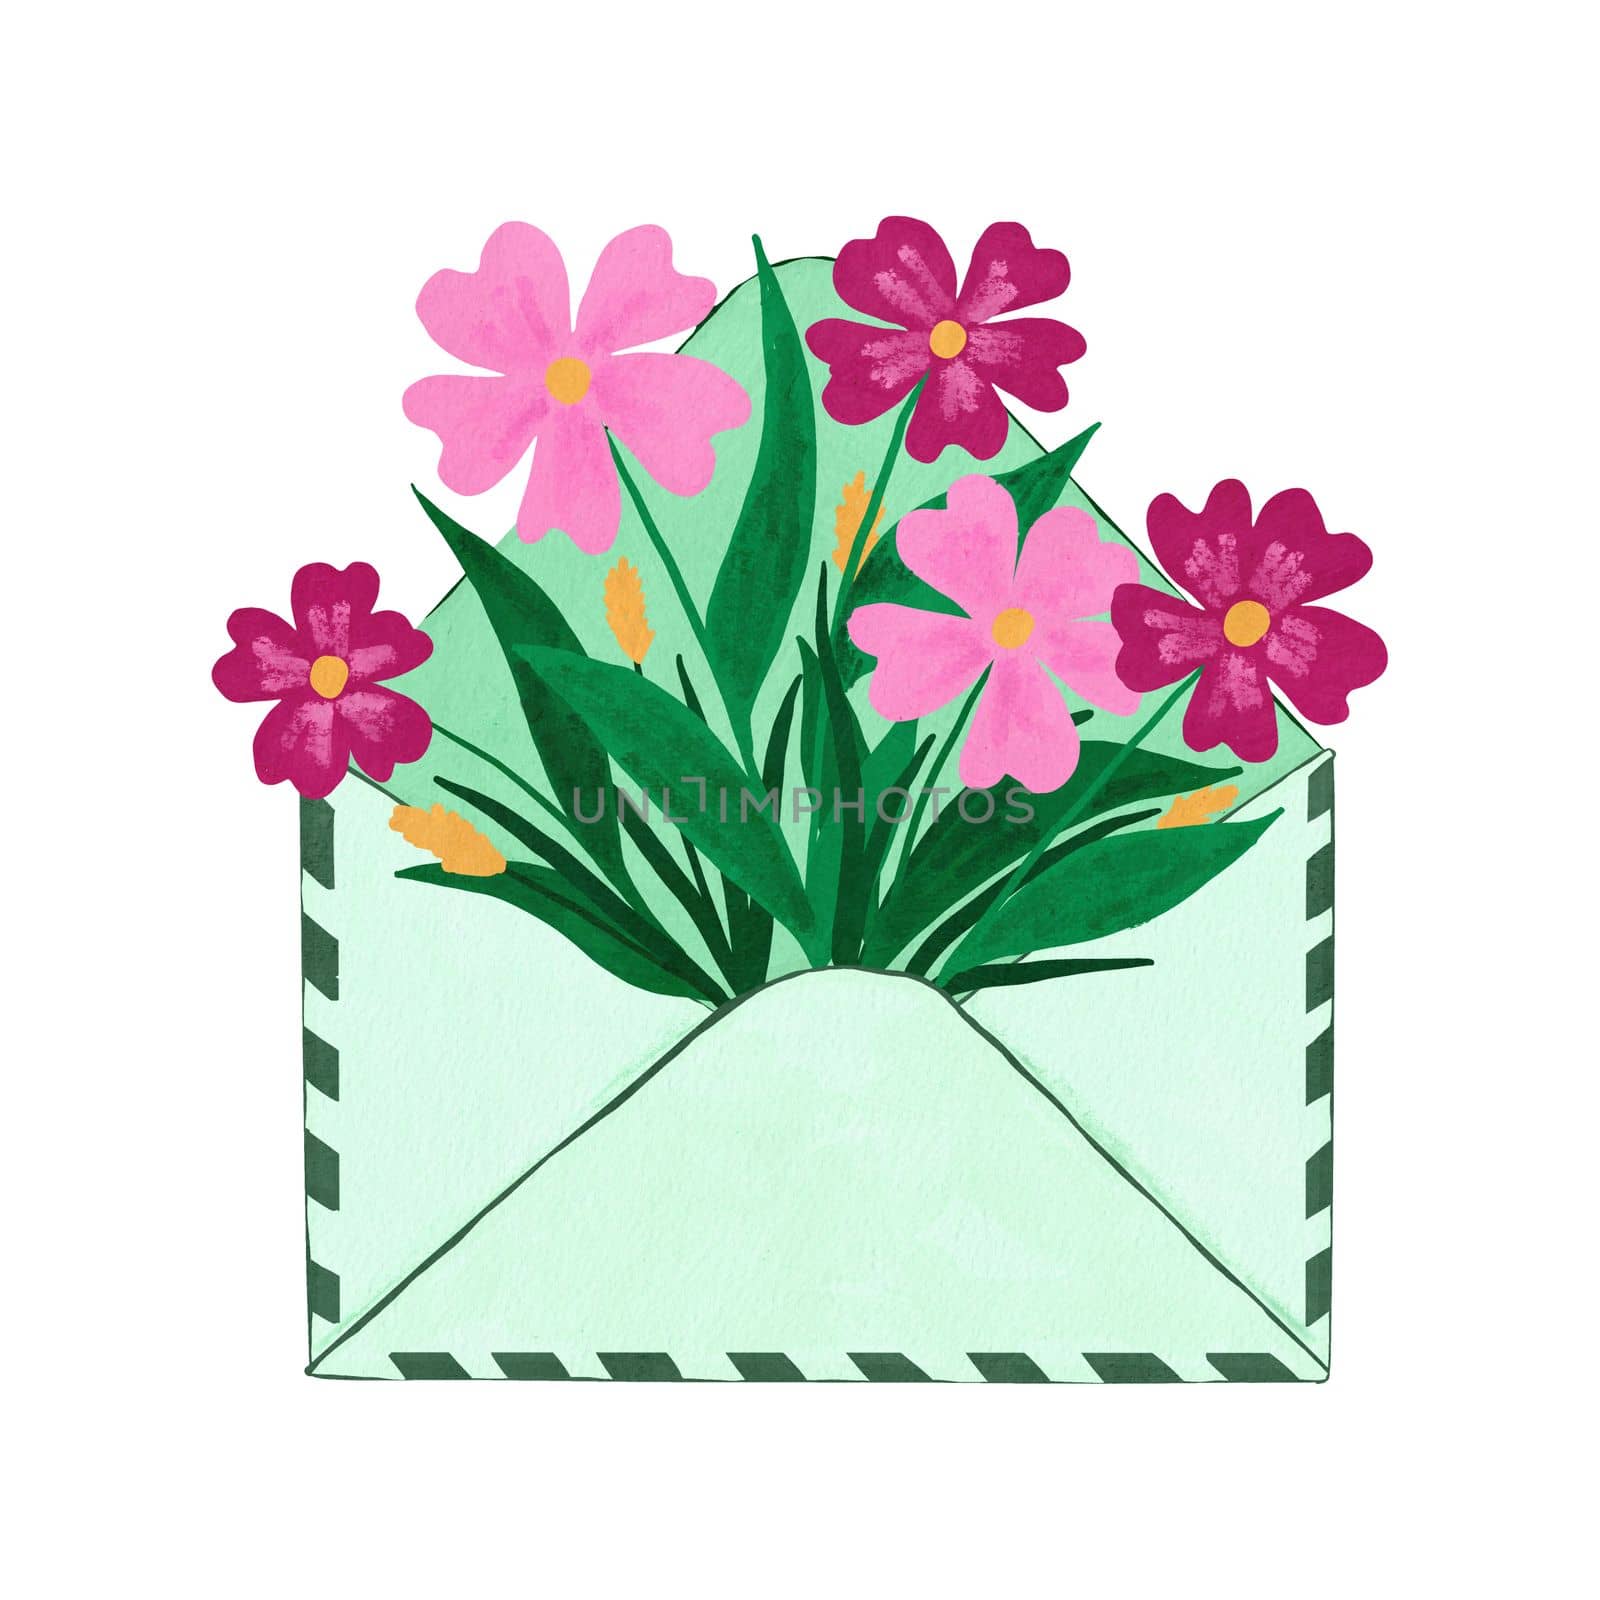 Hand drawn illustration of open letter envelope mailing list, sending business information invitation card. Pink spring summer flowers in green leaves red floral foliage, love thank you card